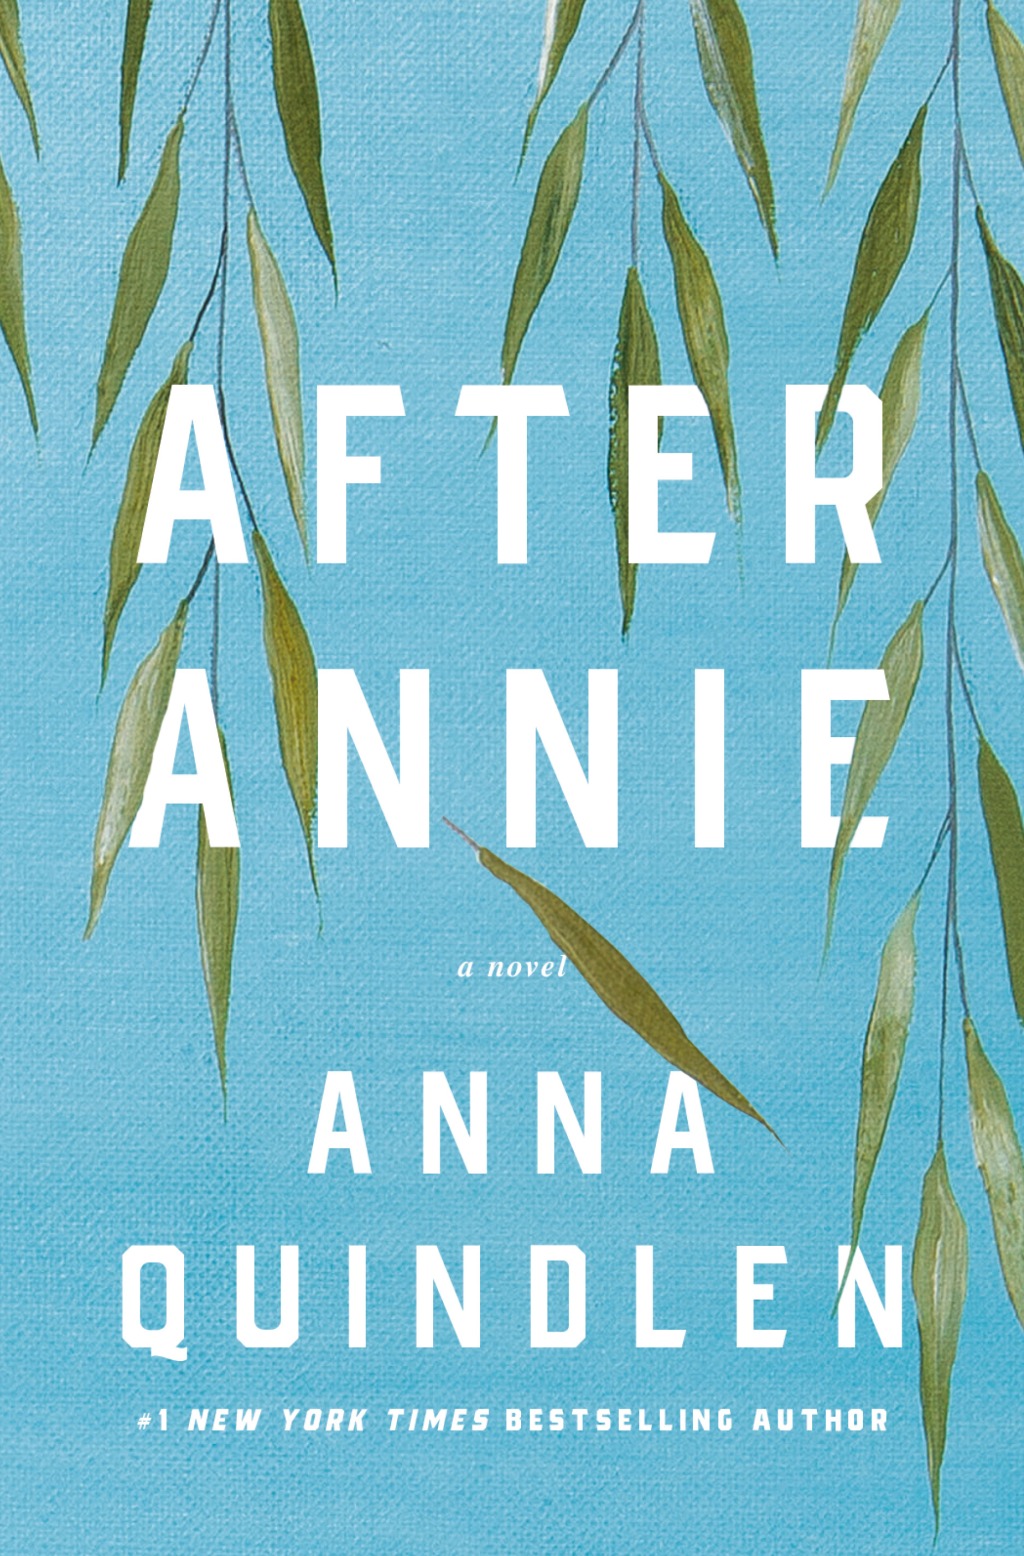 Reviewed: “After Annie” by Anna Quindlen